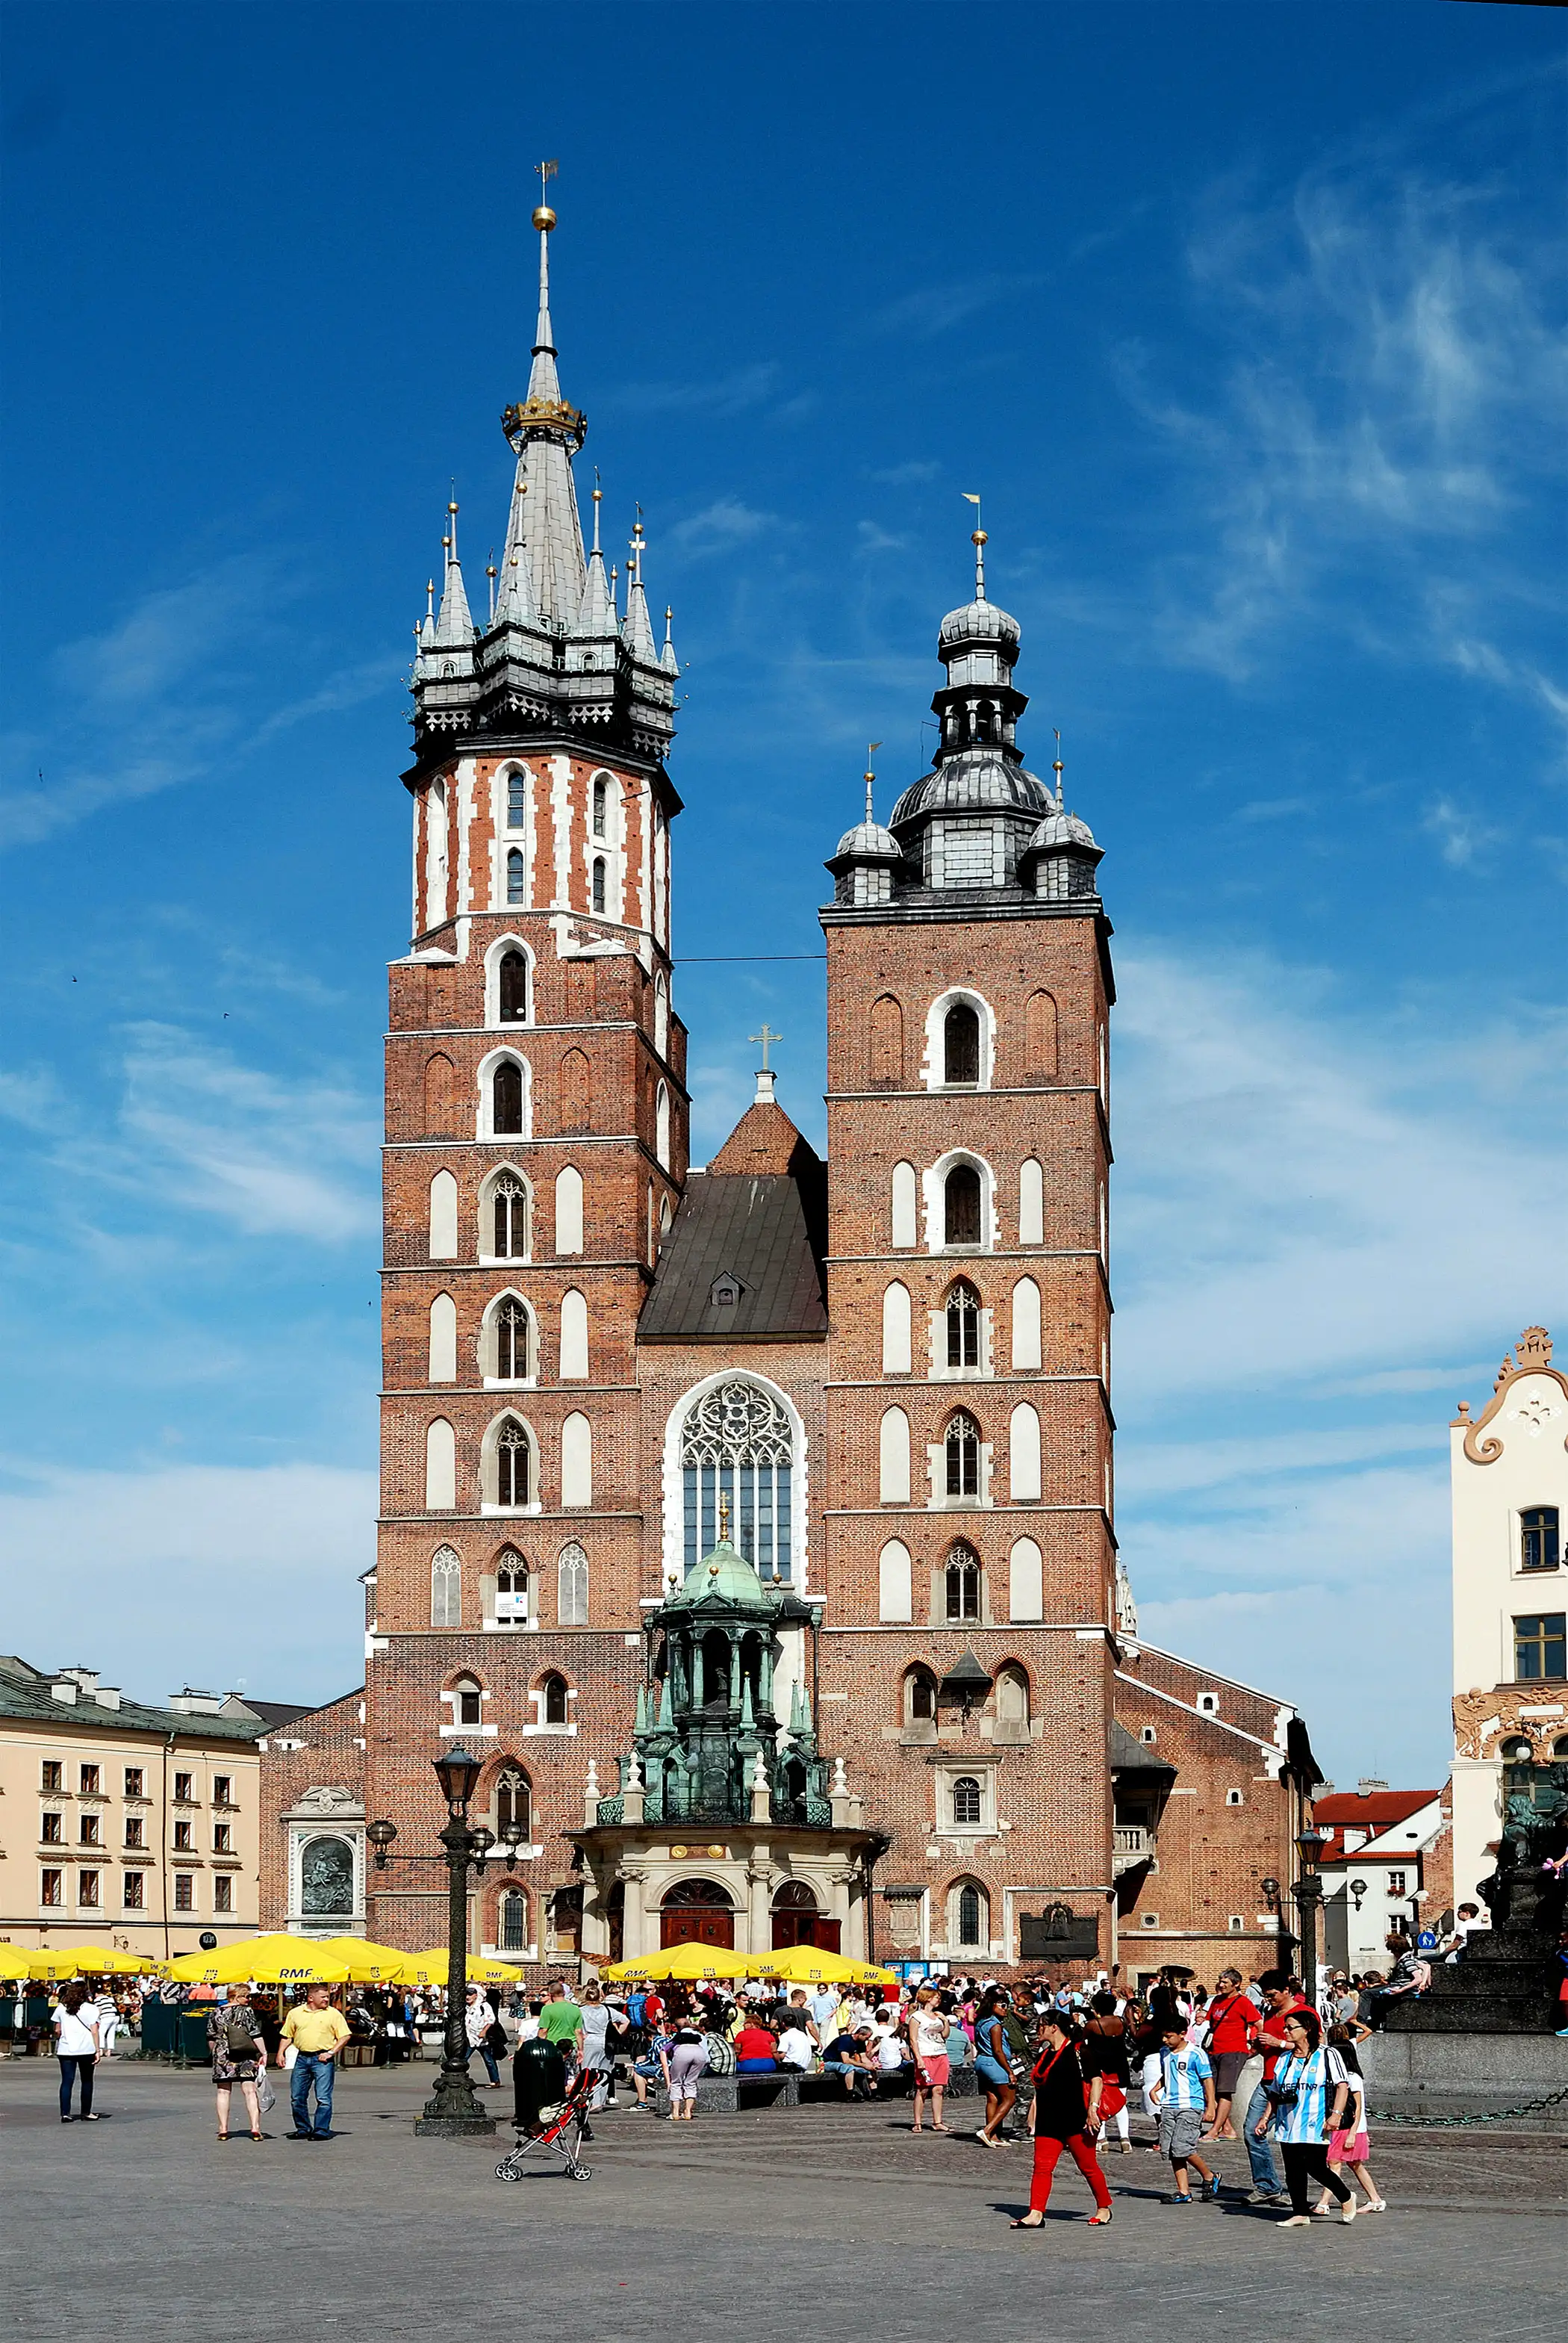 St. Mary's Church at Main market square in the old town of Krakow in Poland.